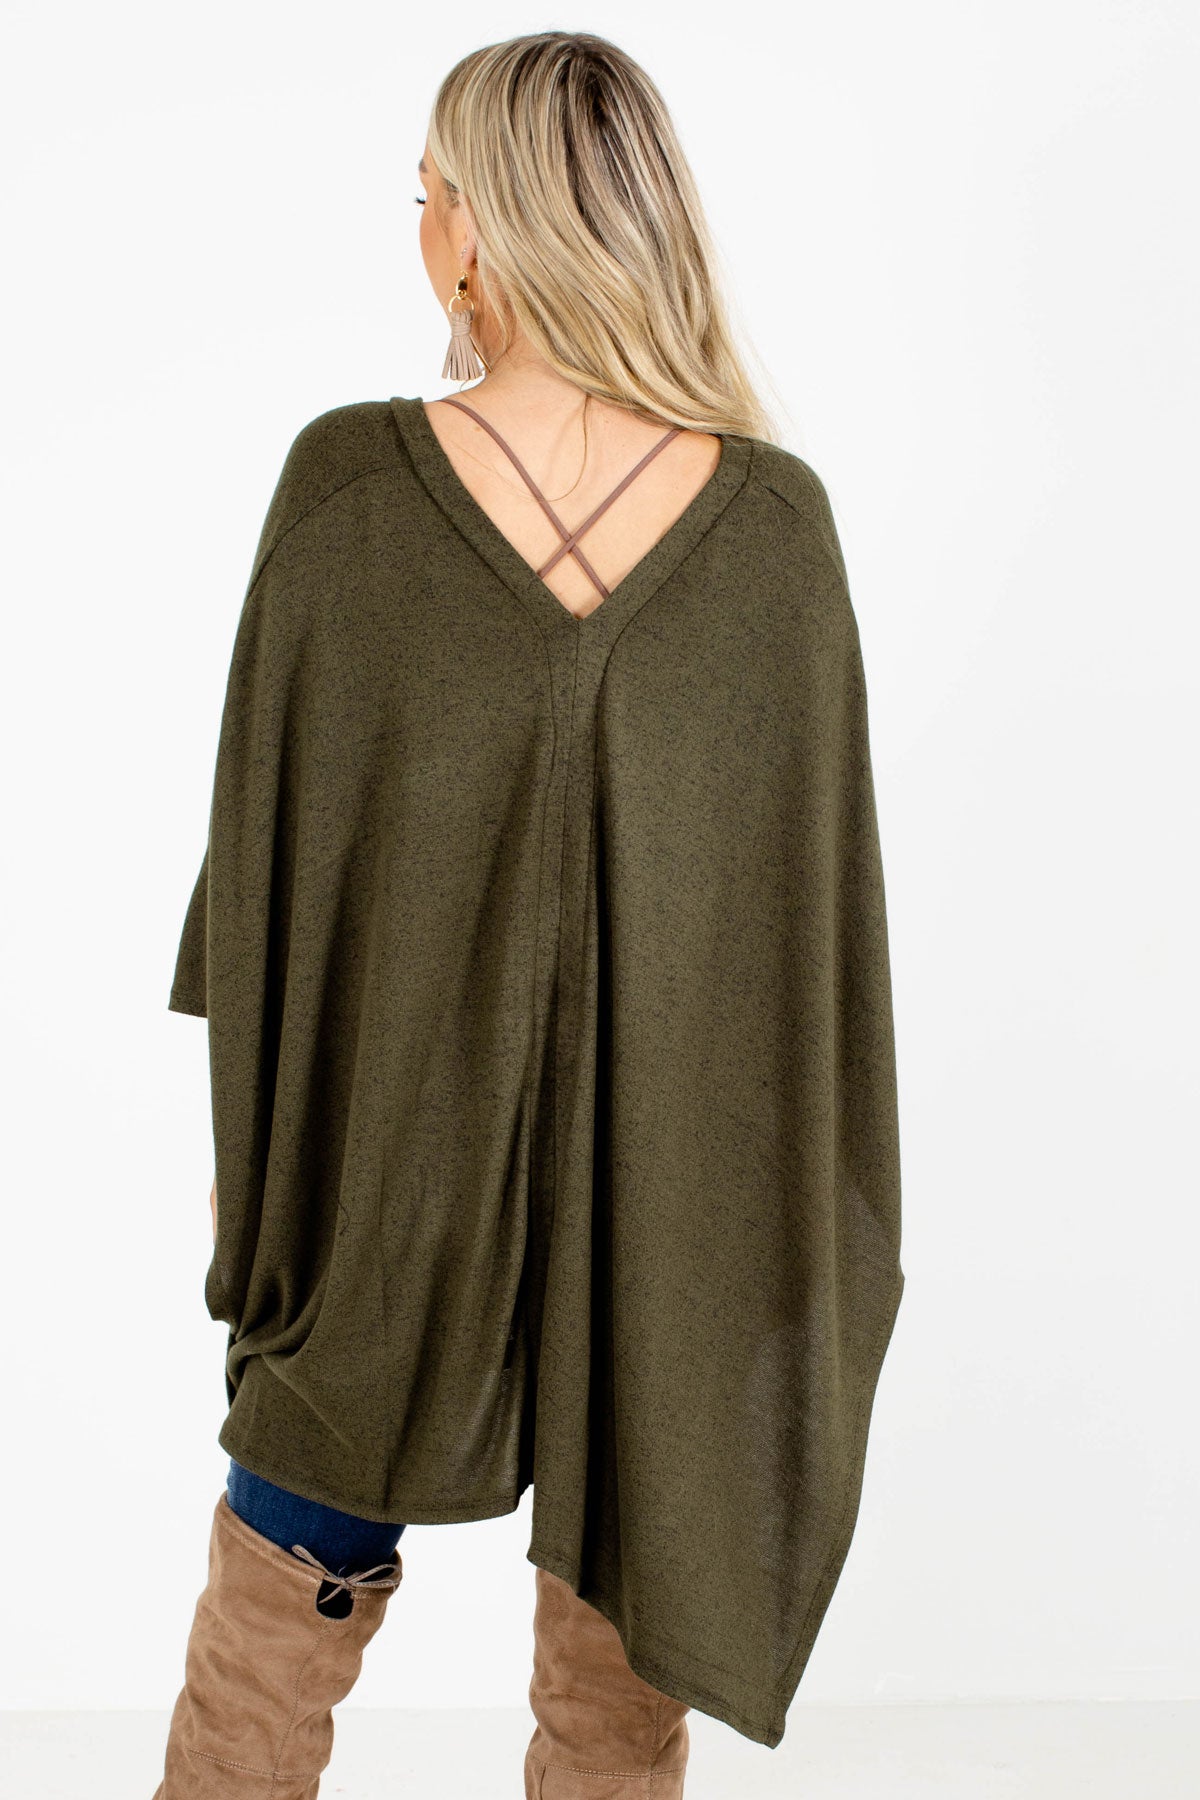 Green Oversized Fit Boutique Tops for Women